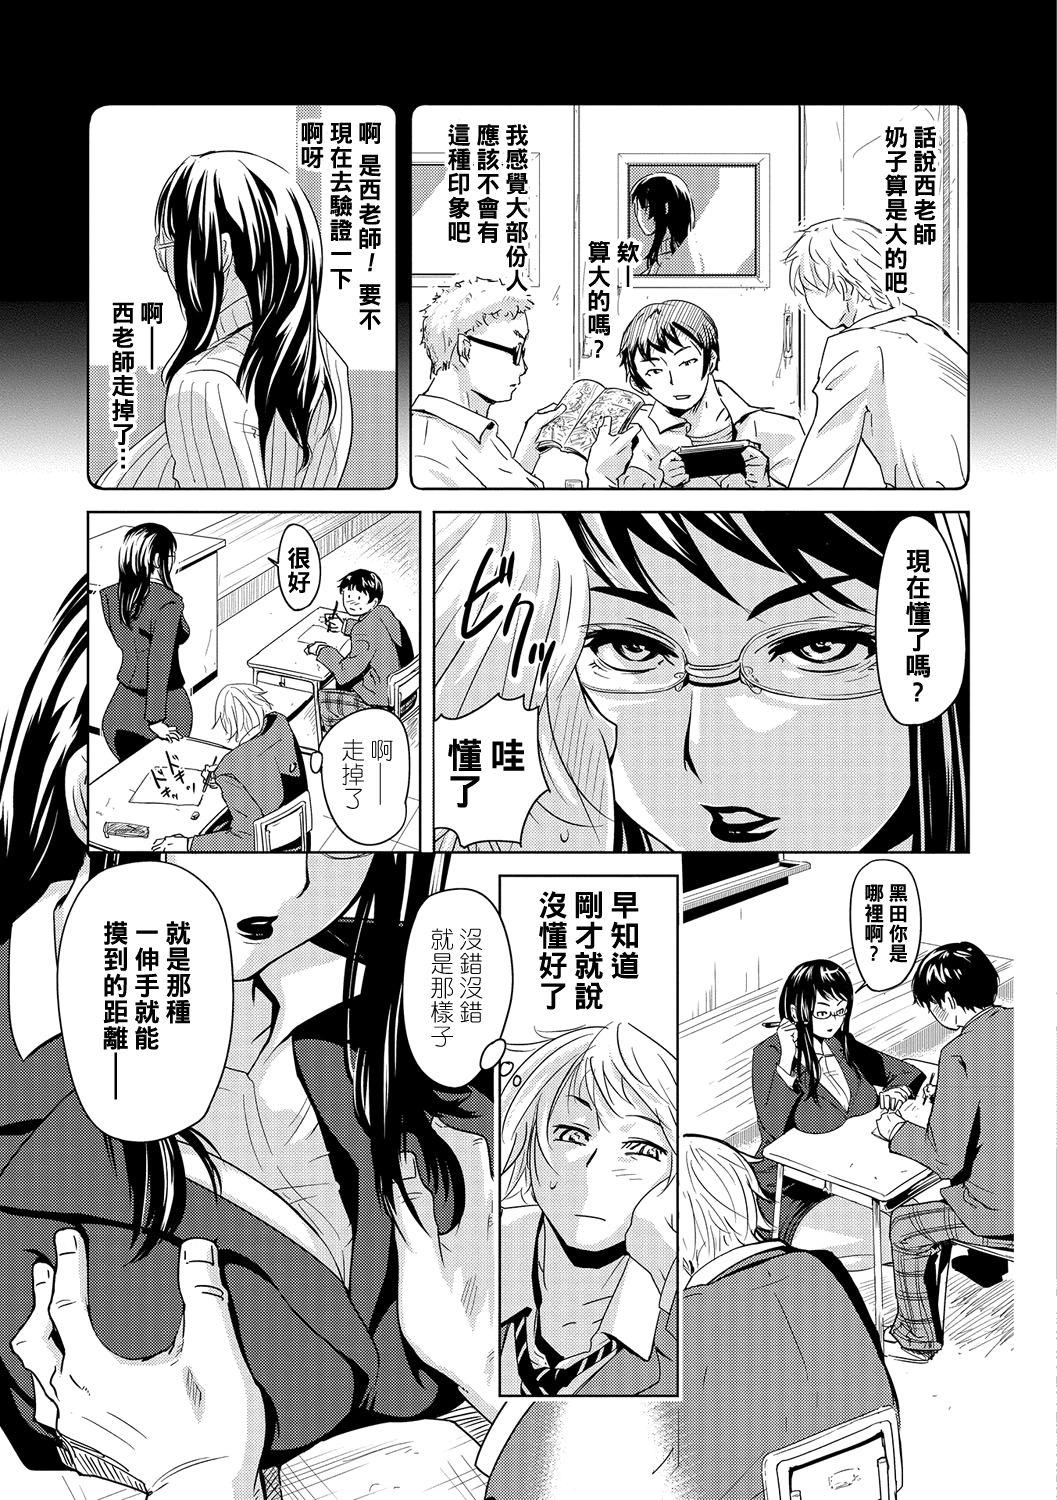 Spy Camera 補習戦略～西彩子先生の場合～（Chinese） Shemales - Page 3